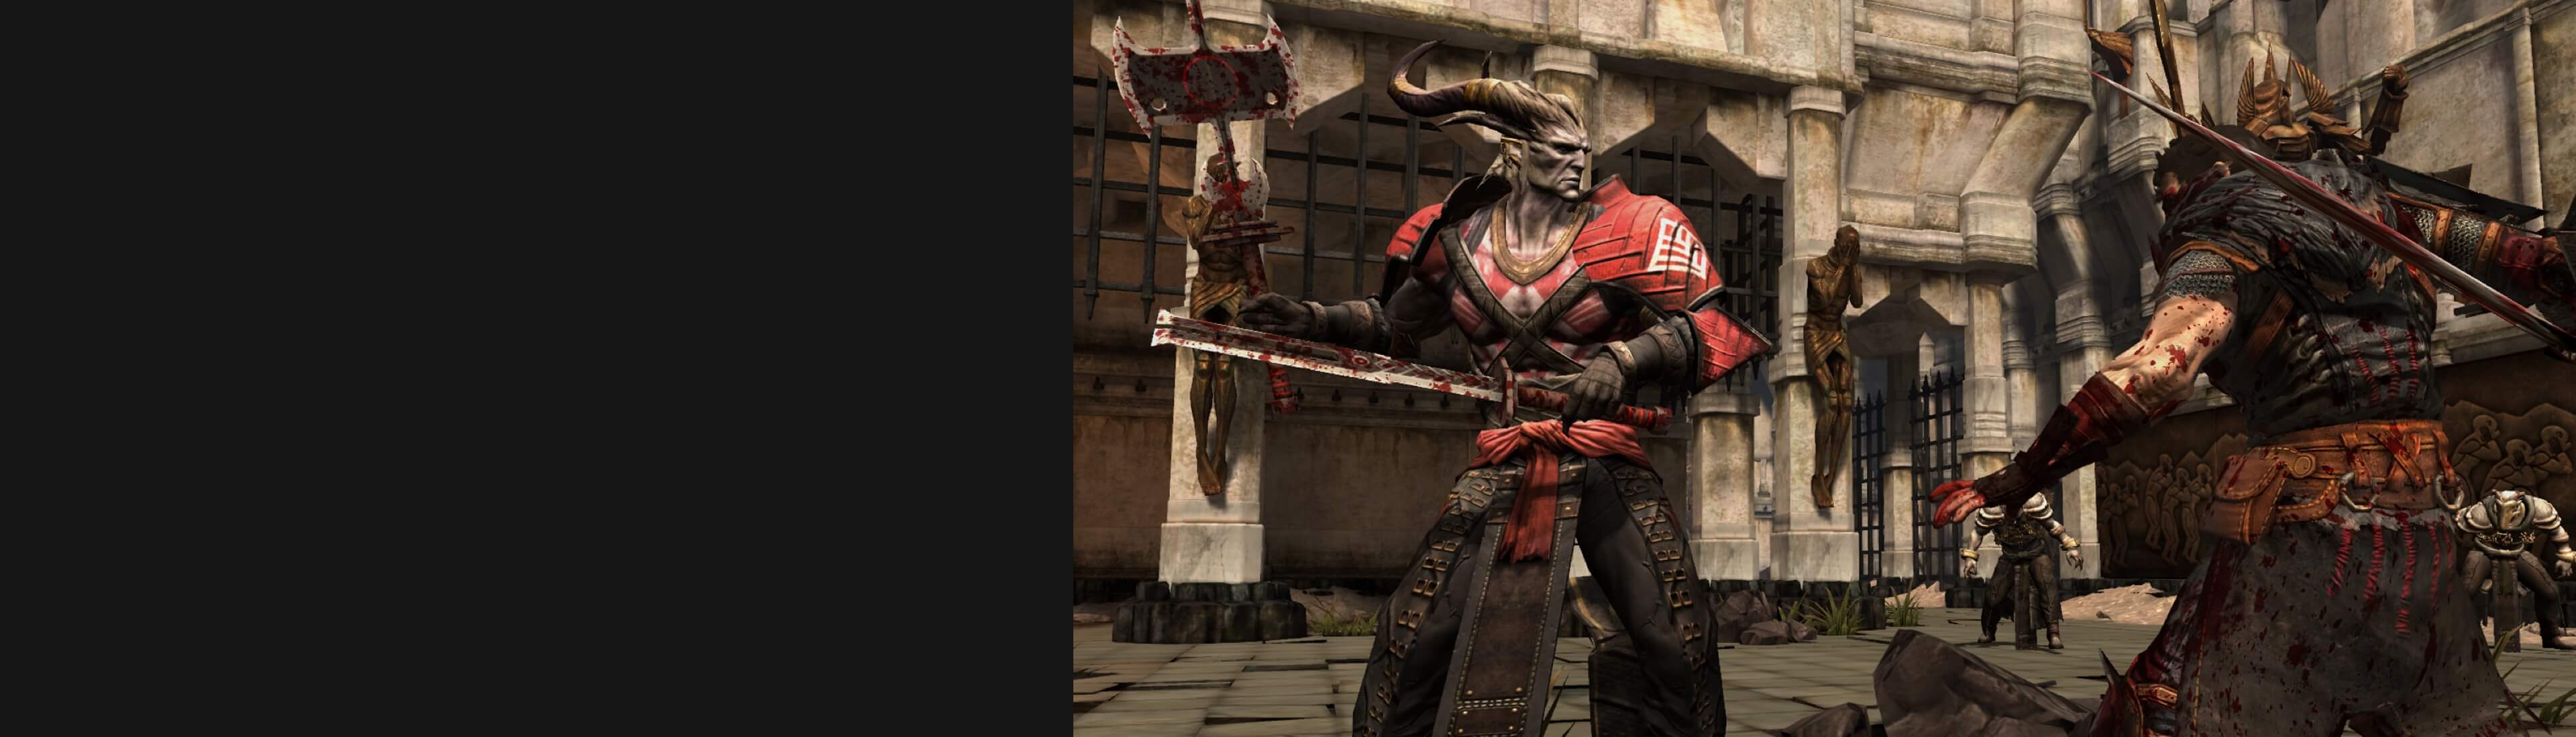 how to customize hawke in dragon age 2 on pc